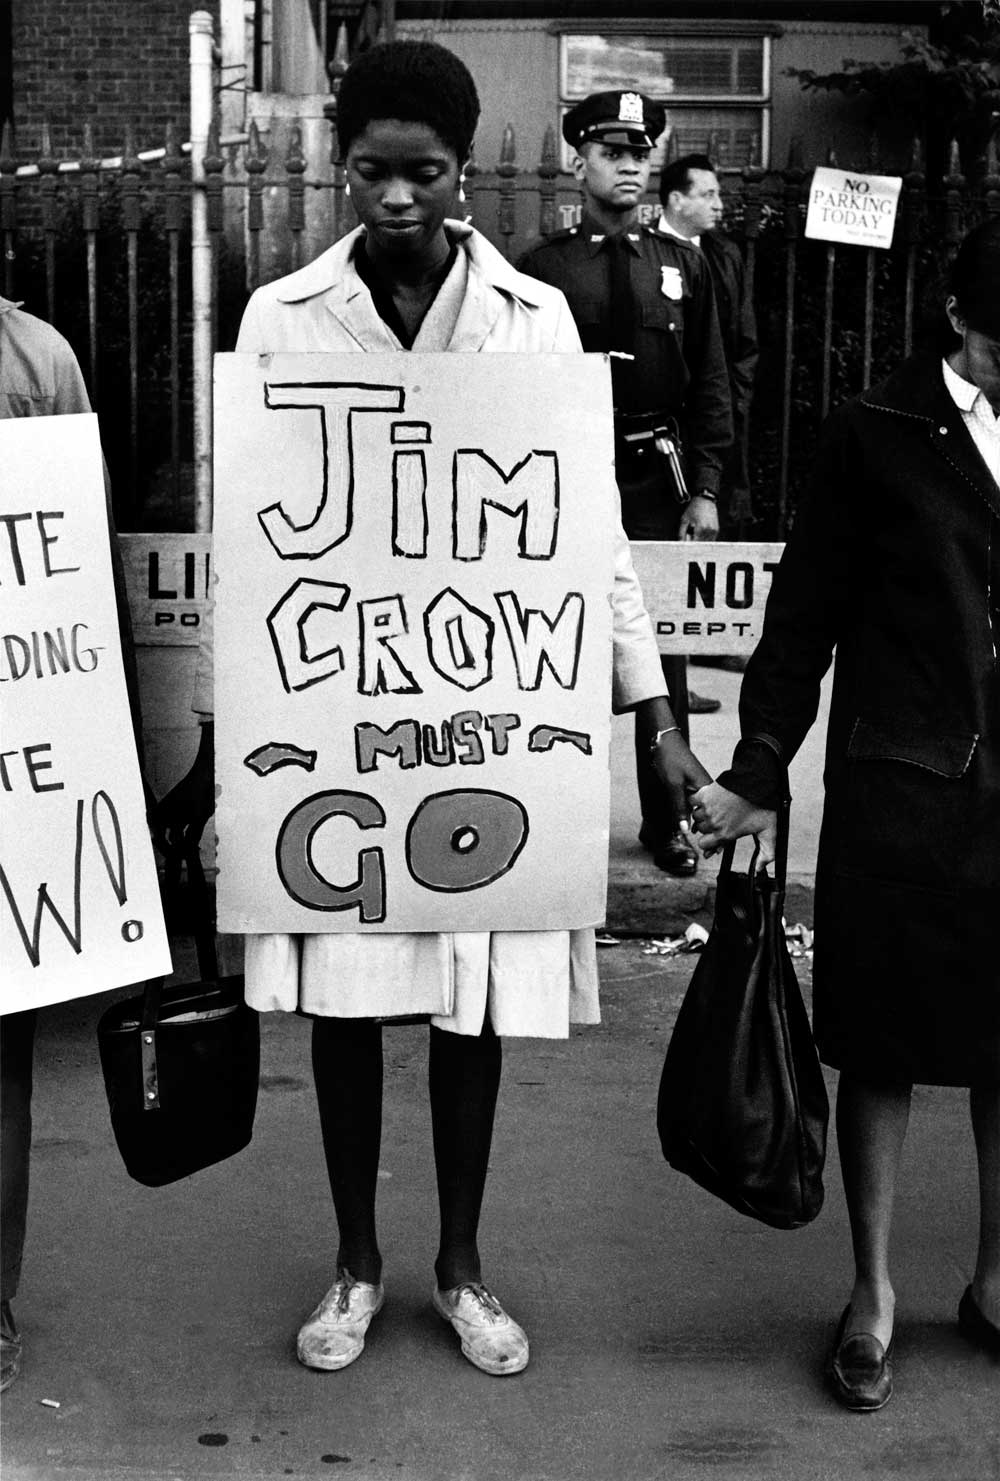 A woman stands in a line of protesters holding hands, with a sign around her that says “Jim Crow must go”